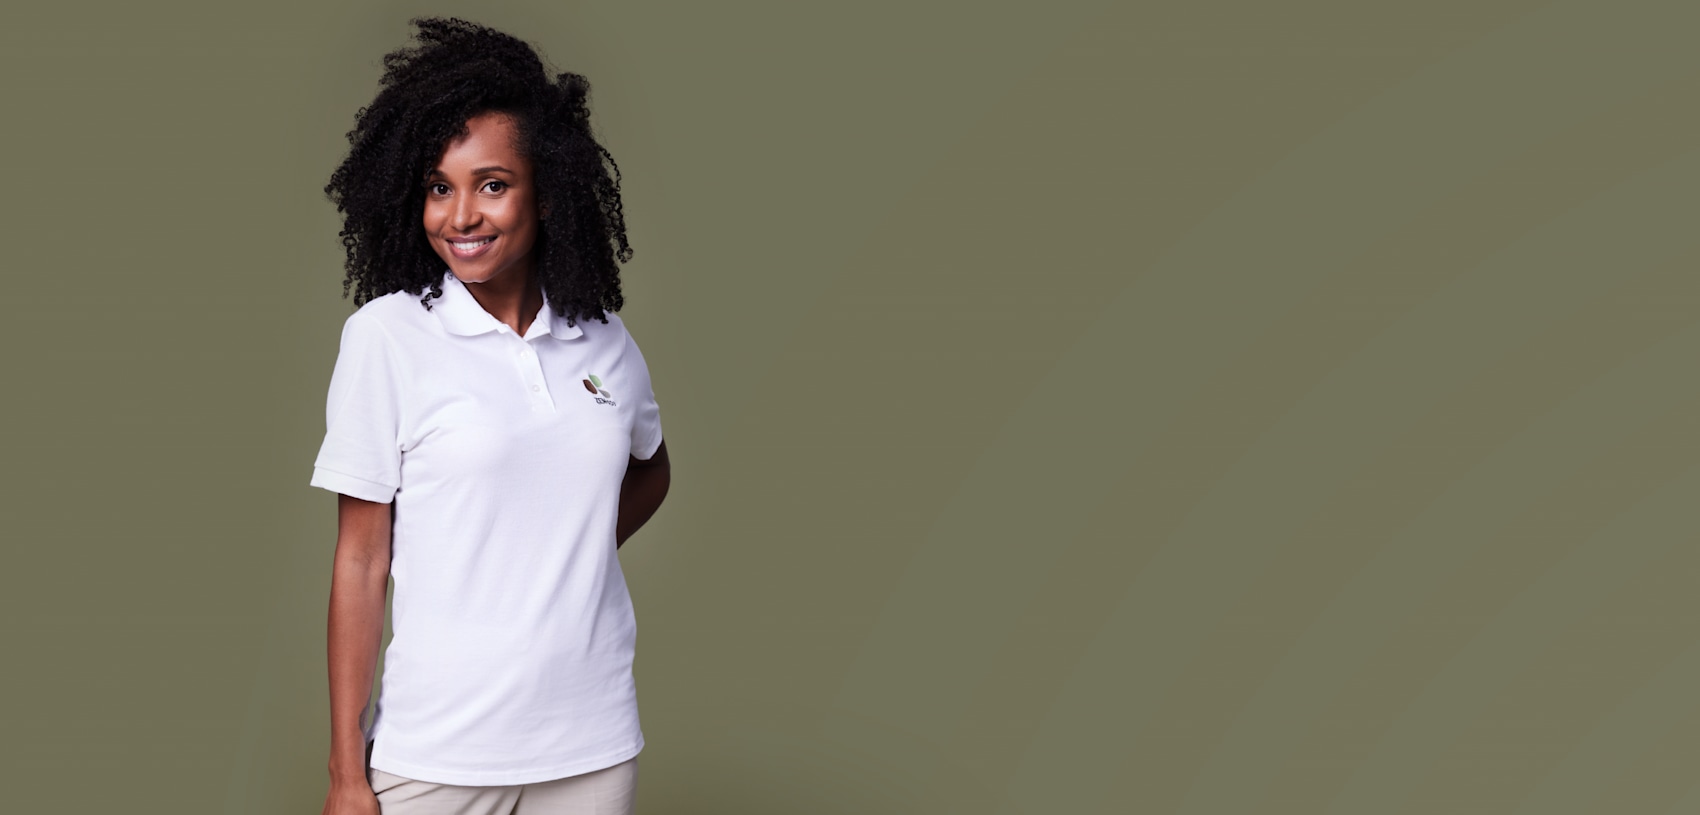 evening stereo Take out insurance Embroidered Jerzees Polos, Custom Women's Polo Shirts | Vistaprint